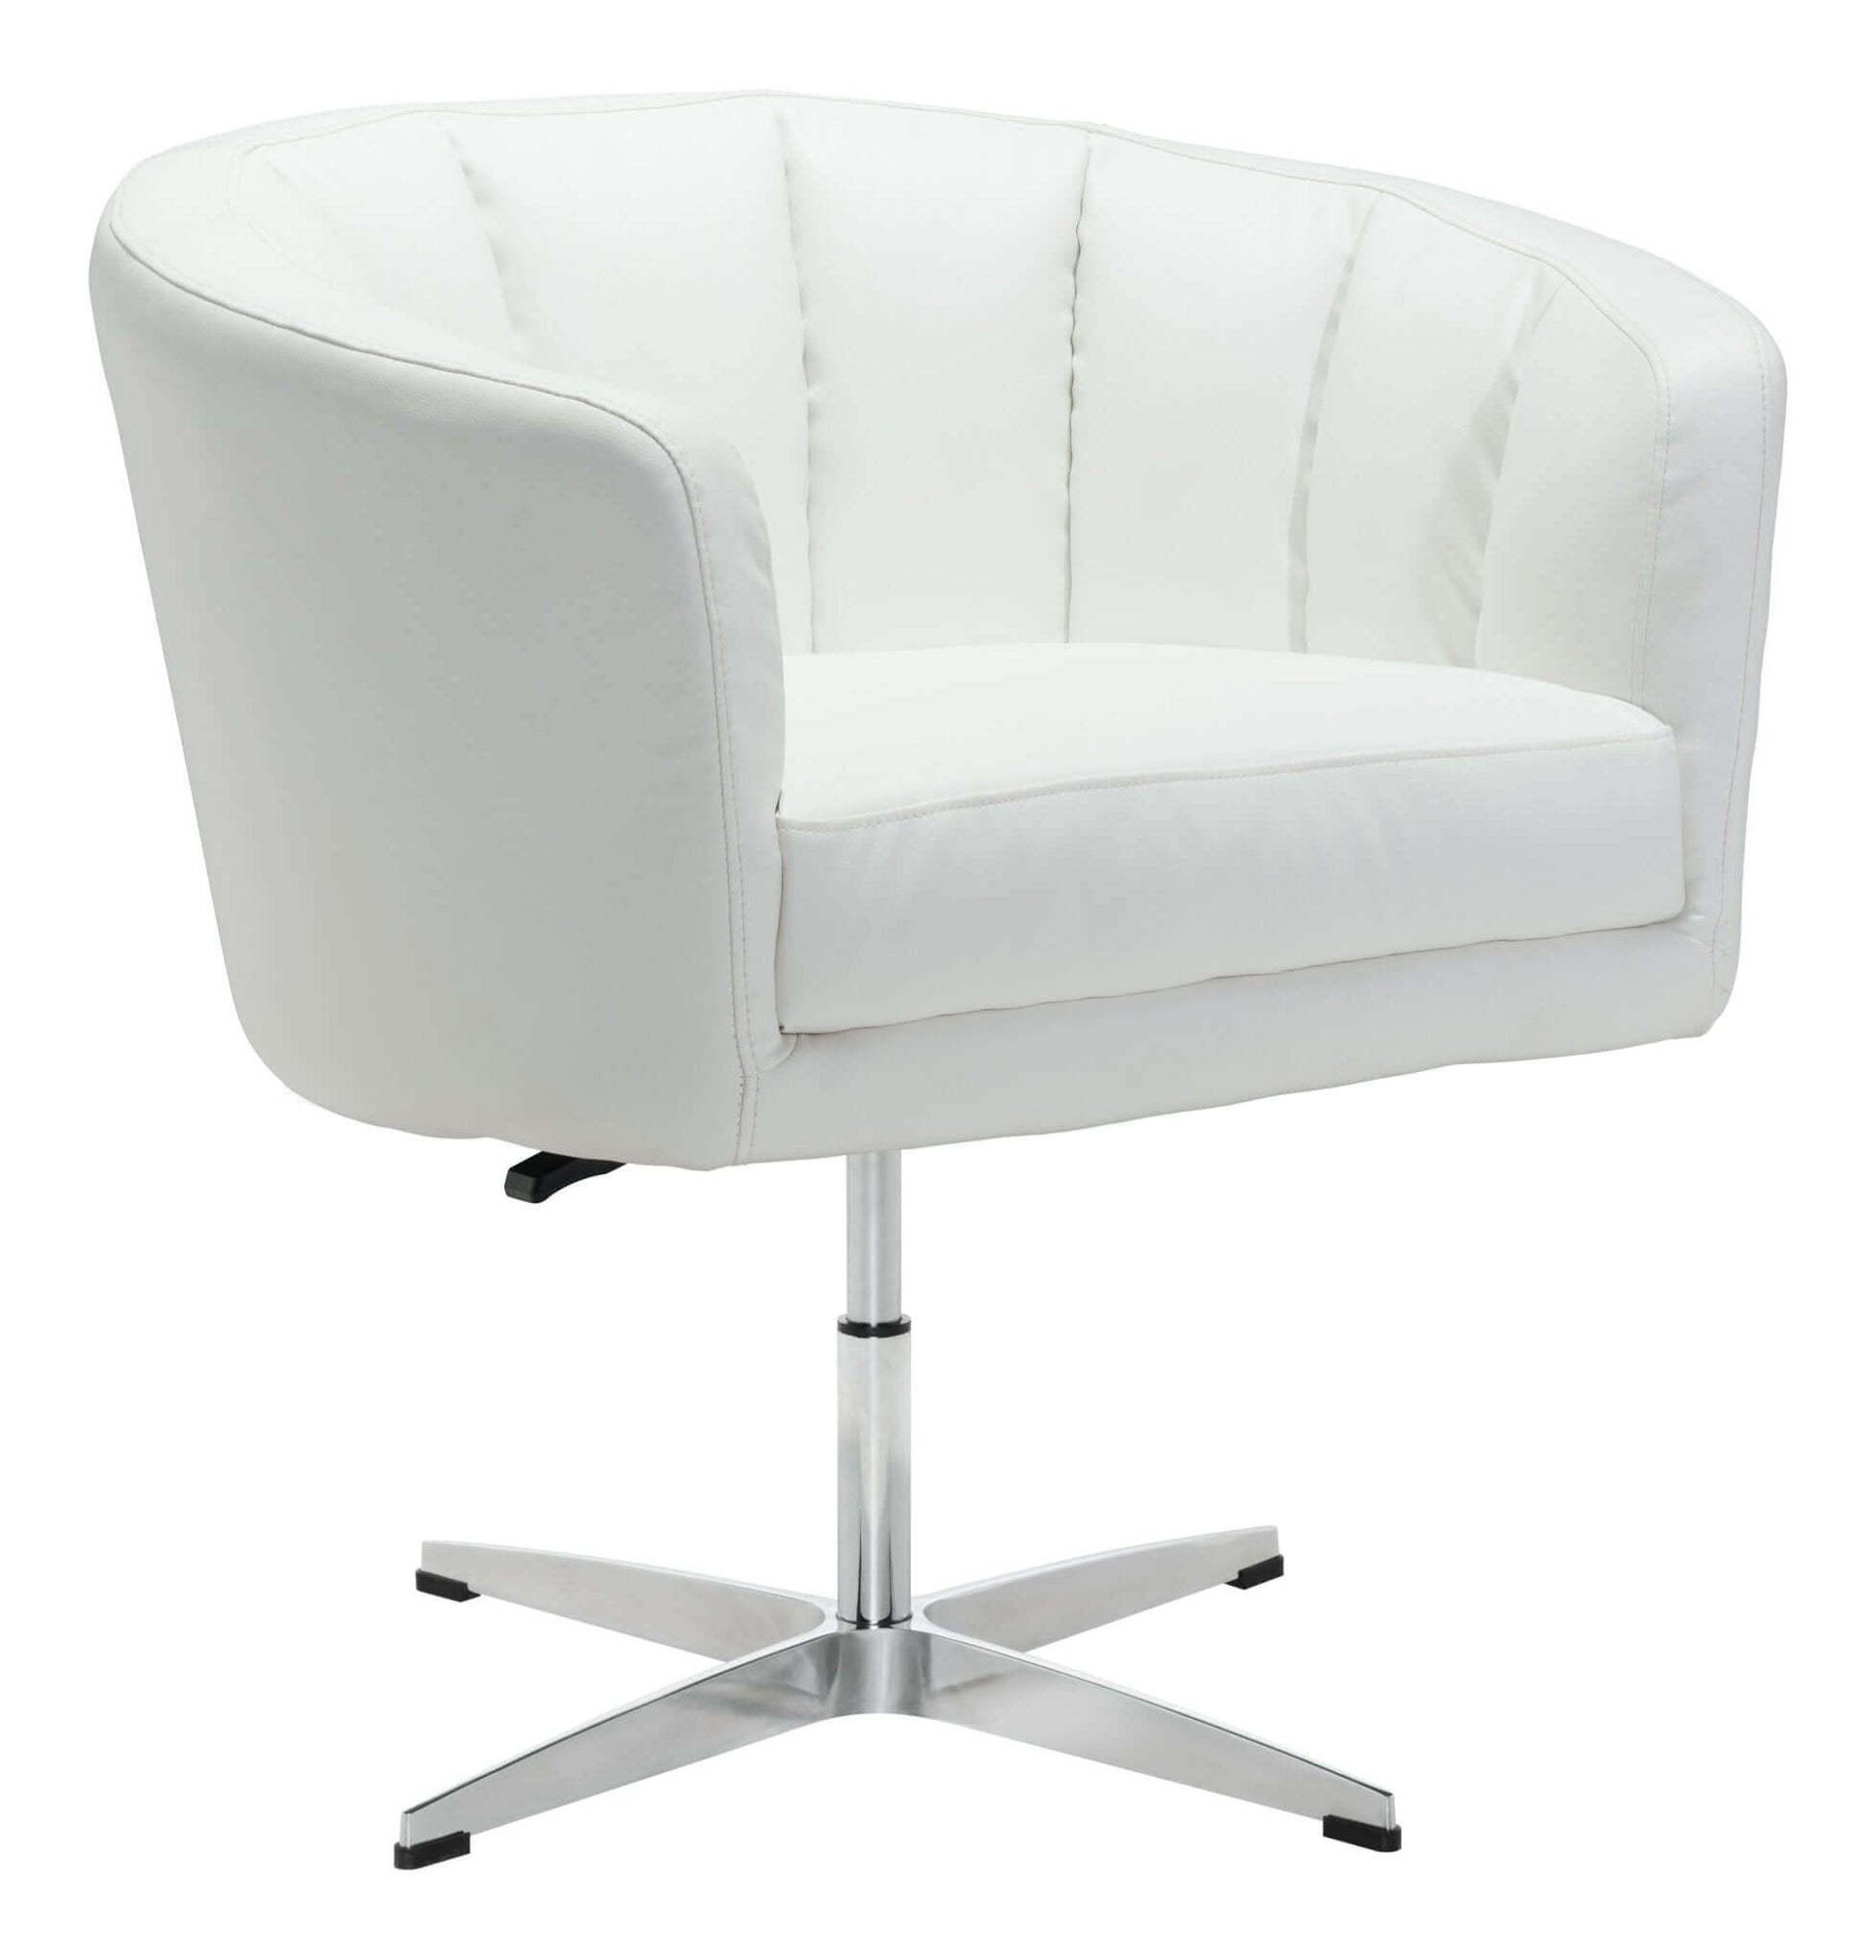 Wilshire Adjustable Channel Tufted Accent Swivel Chair, White or Brown - Revel Sofa 